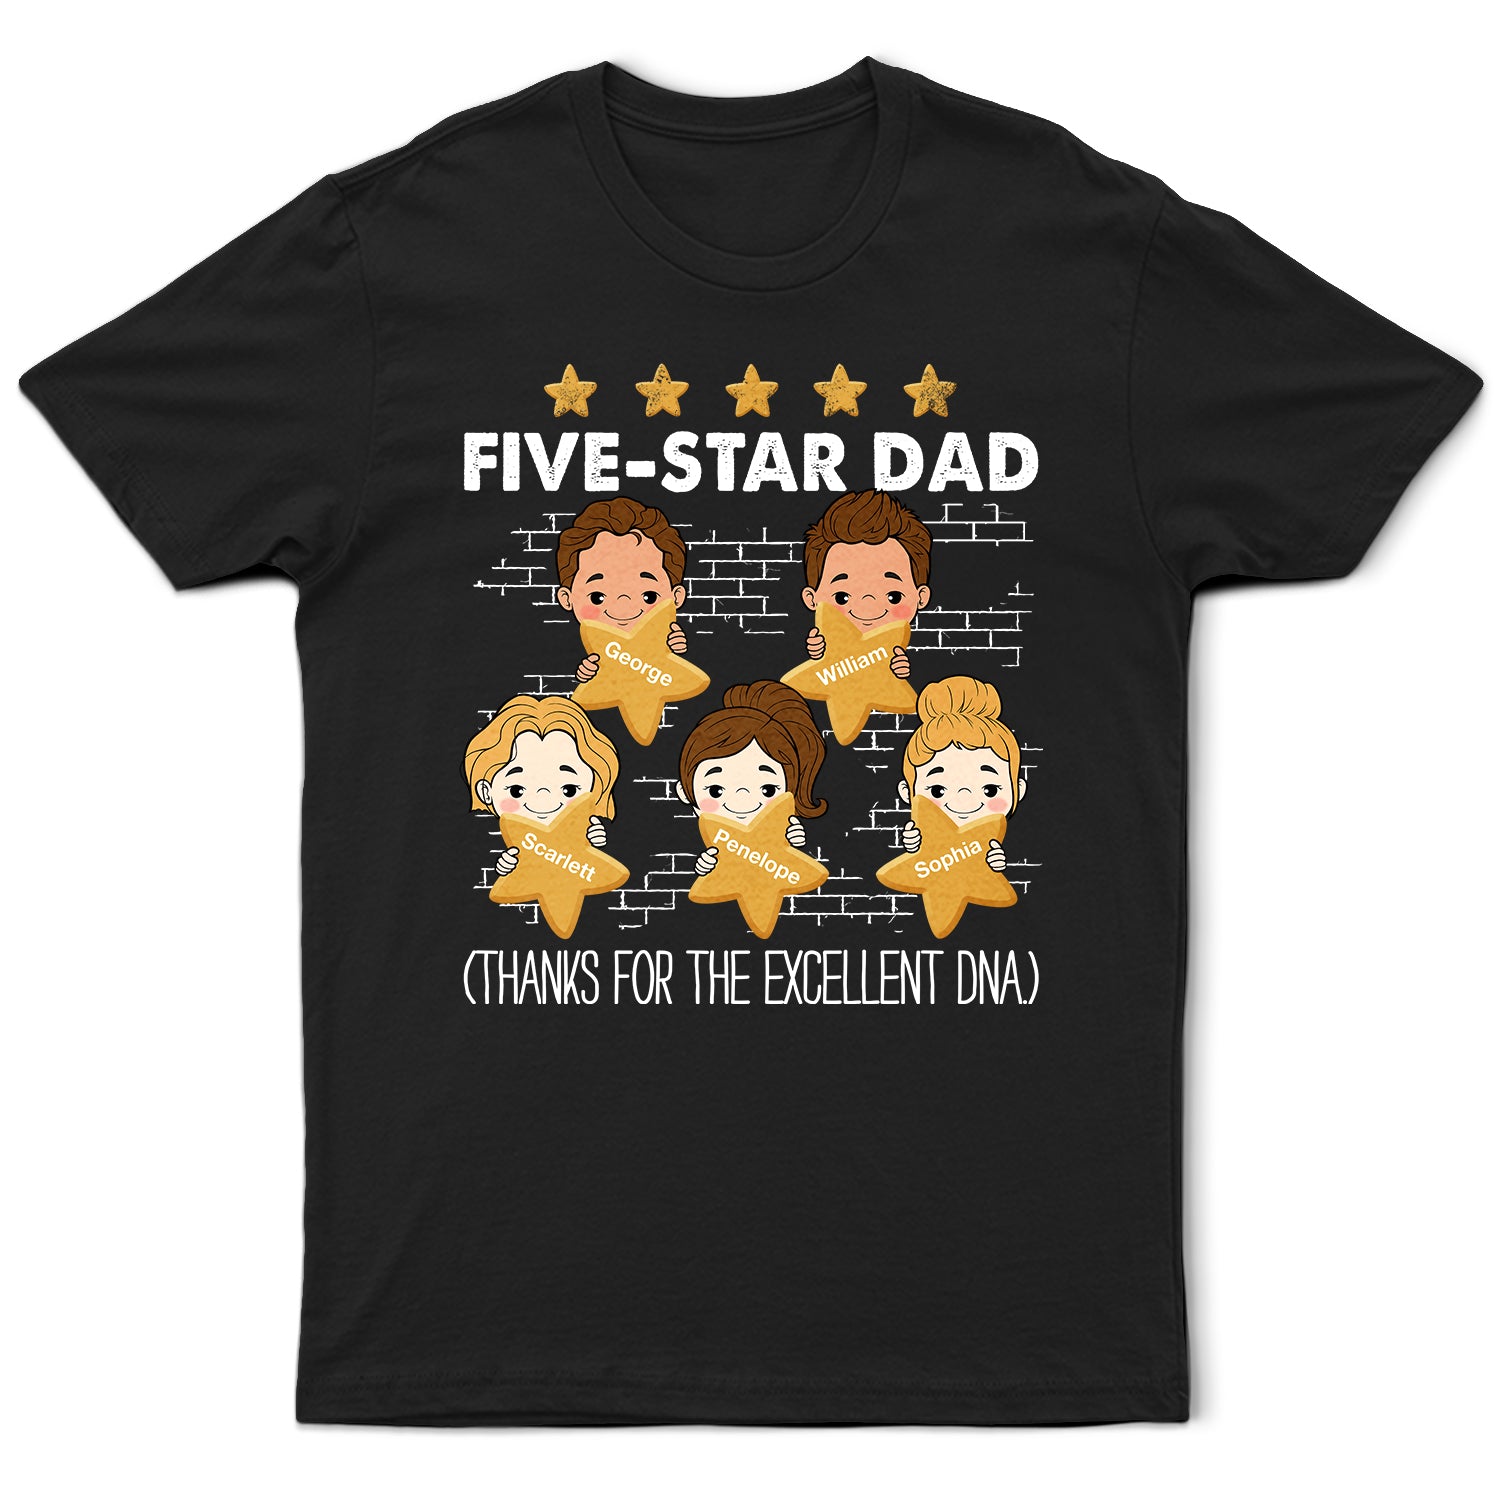 Five - Star Dad Thanks For The Excellent DNA - Personalized T Shirt